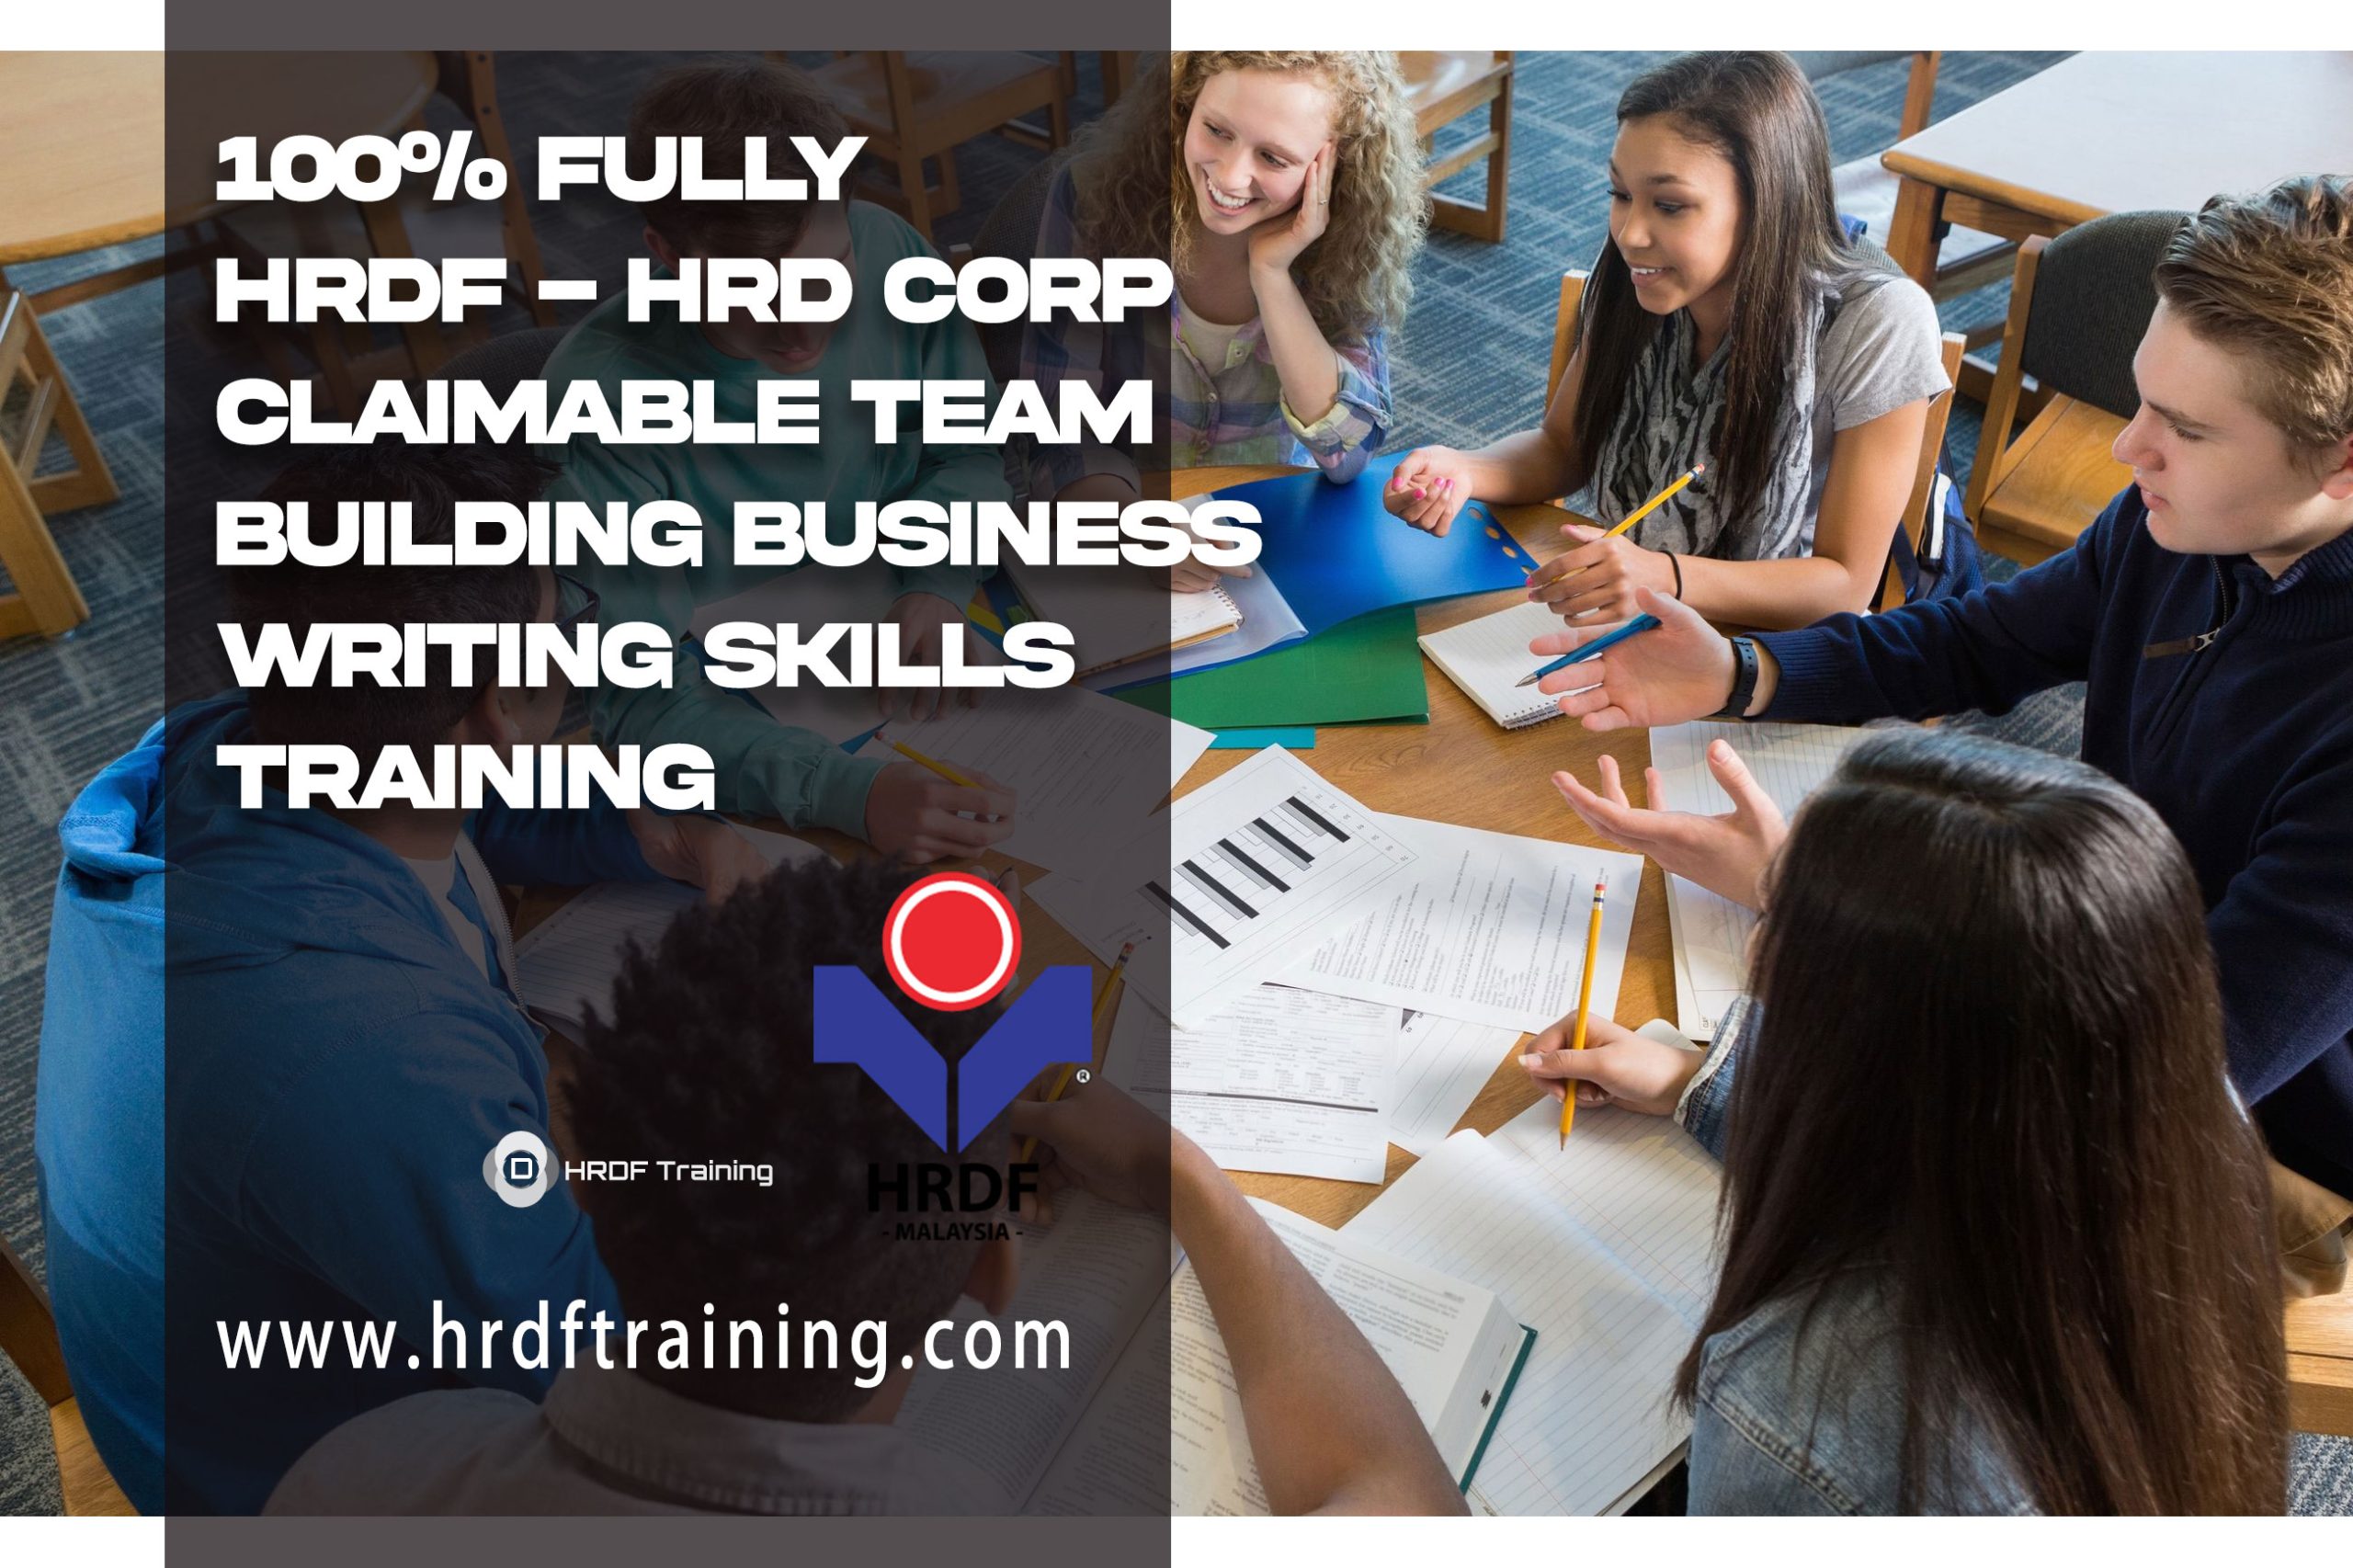 HRDF—HRD-Corp-Claimable-Team-Building-Business-Writing-Skills-Training